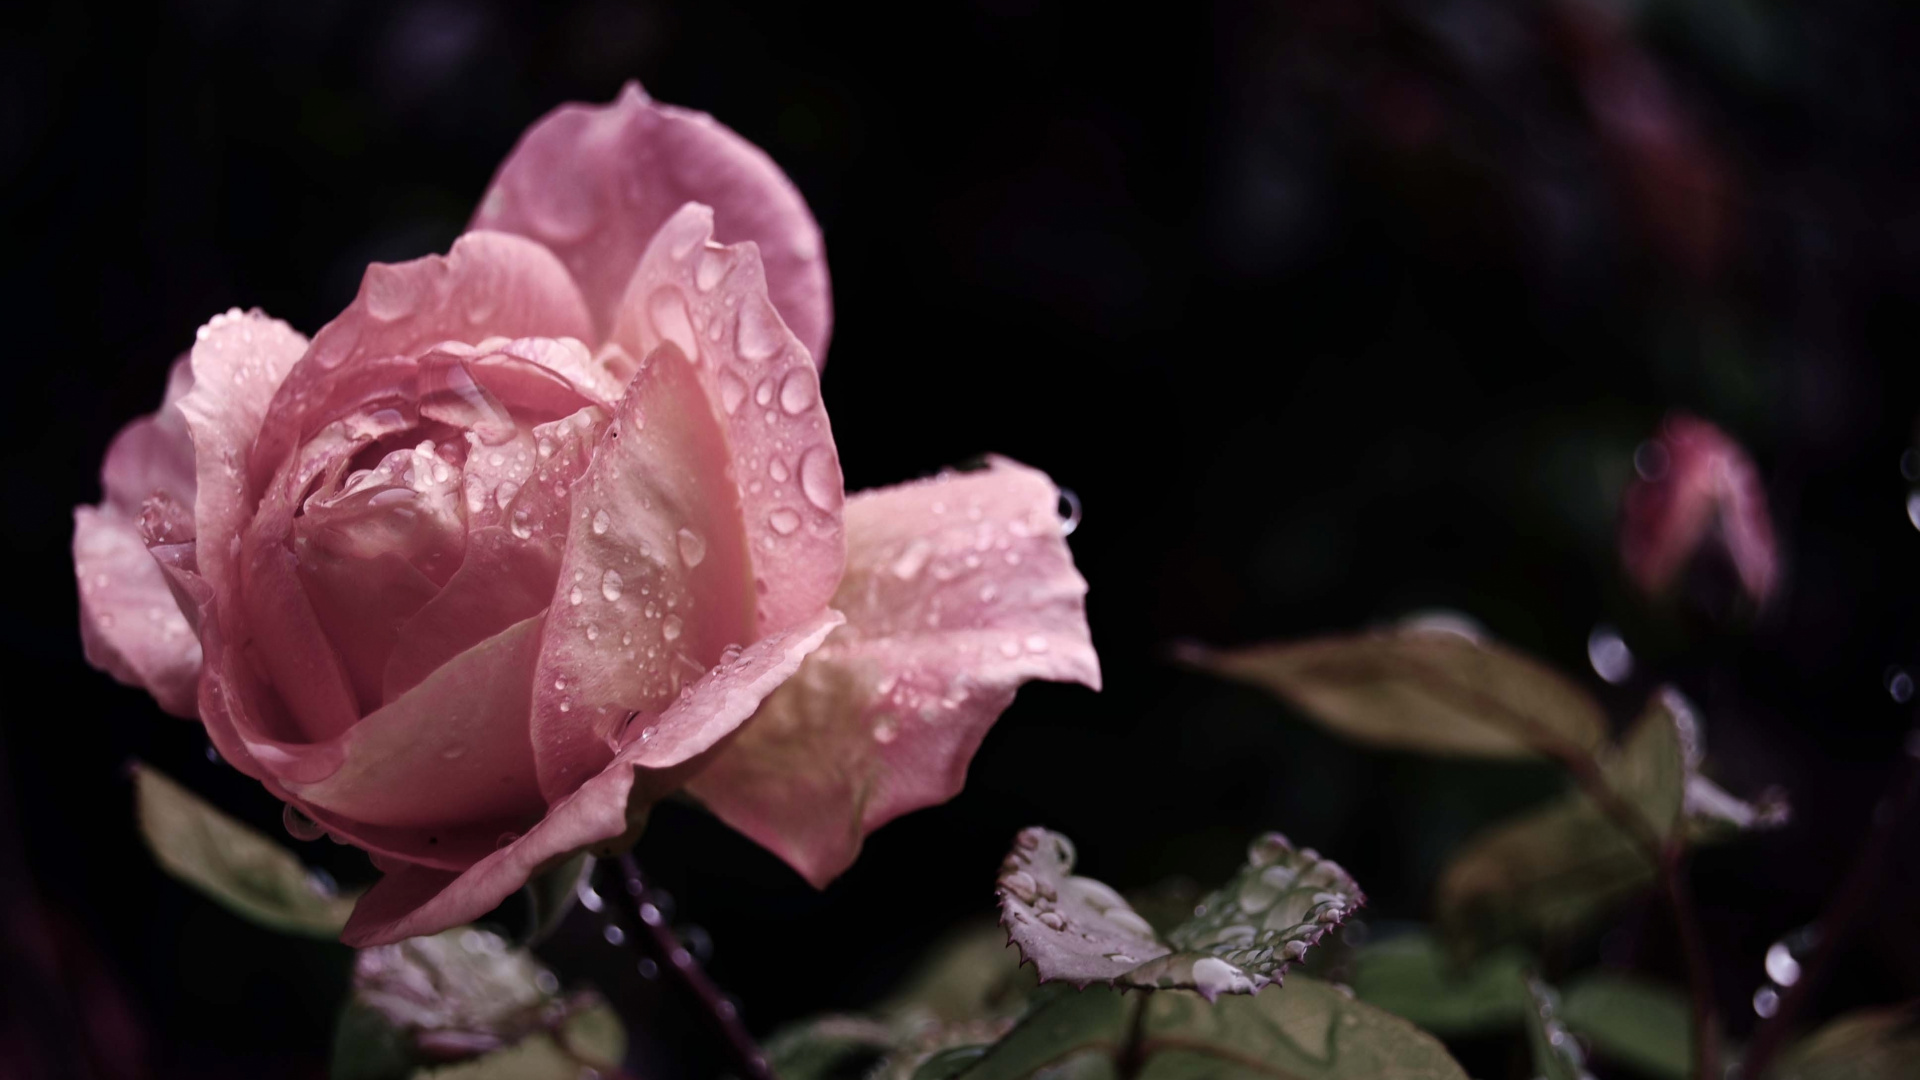 Pink Rose in Bloom During Daytime. Wallpaper in 1920x1080 Resolution